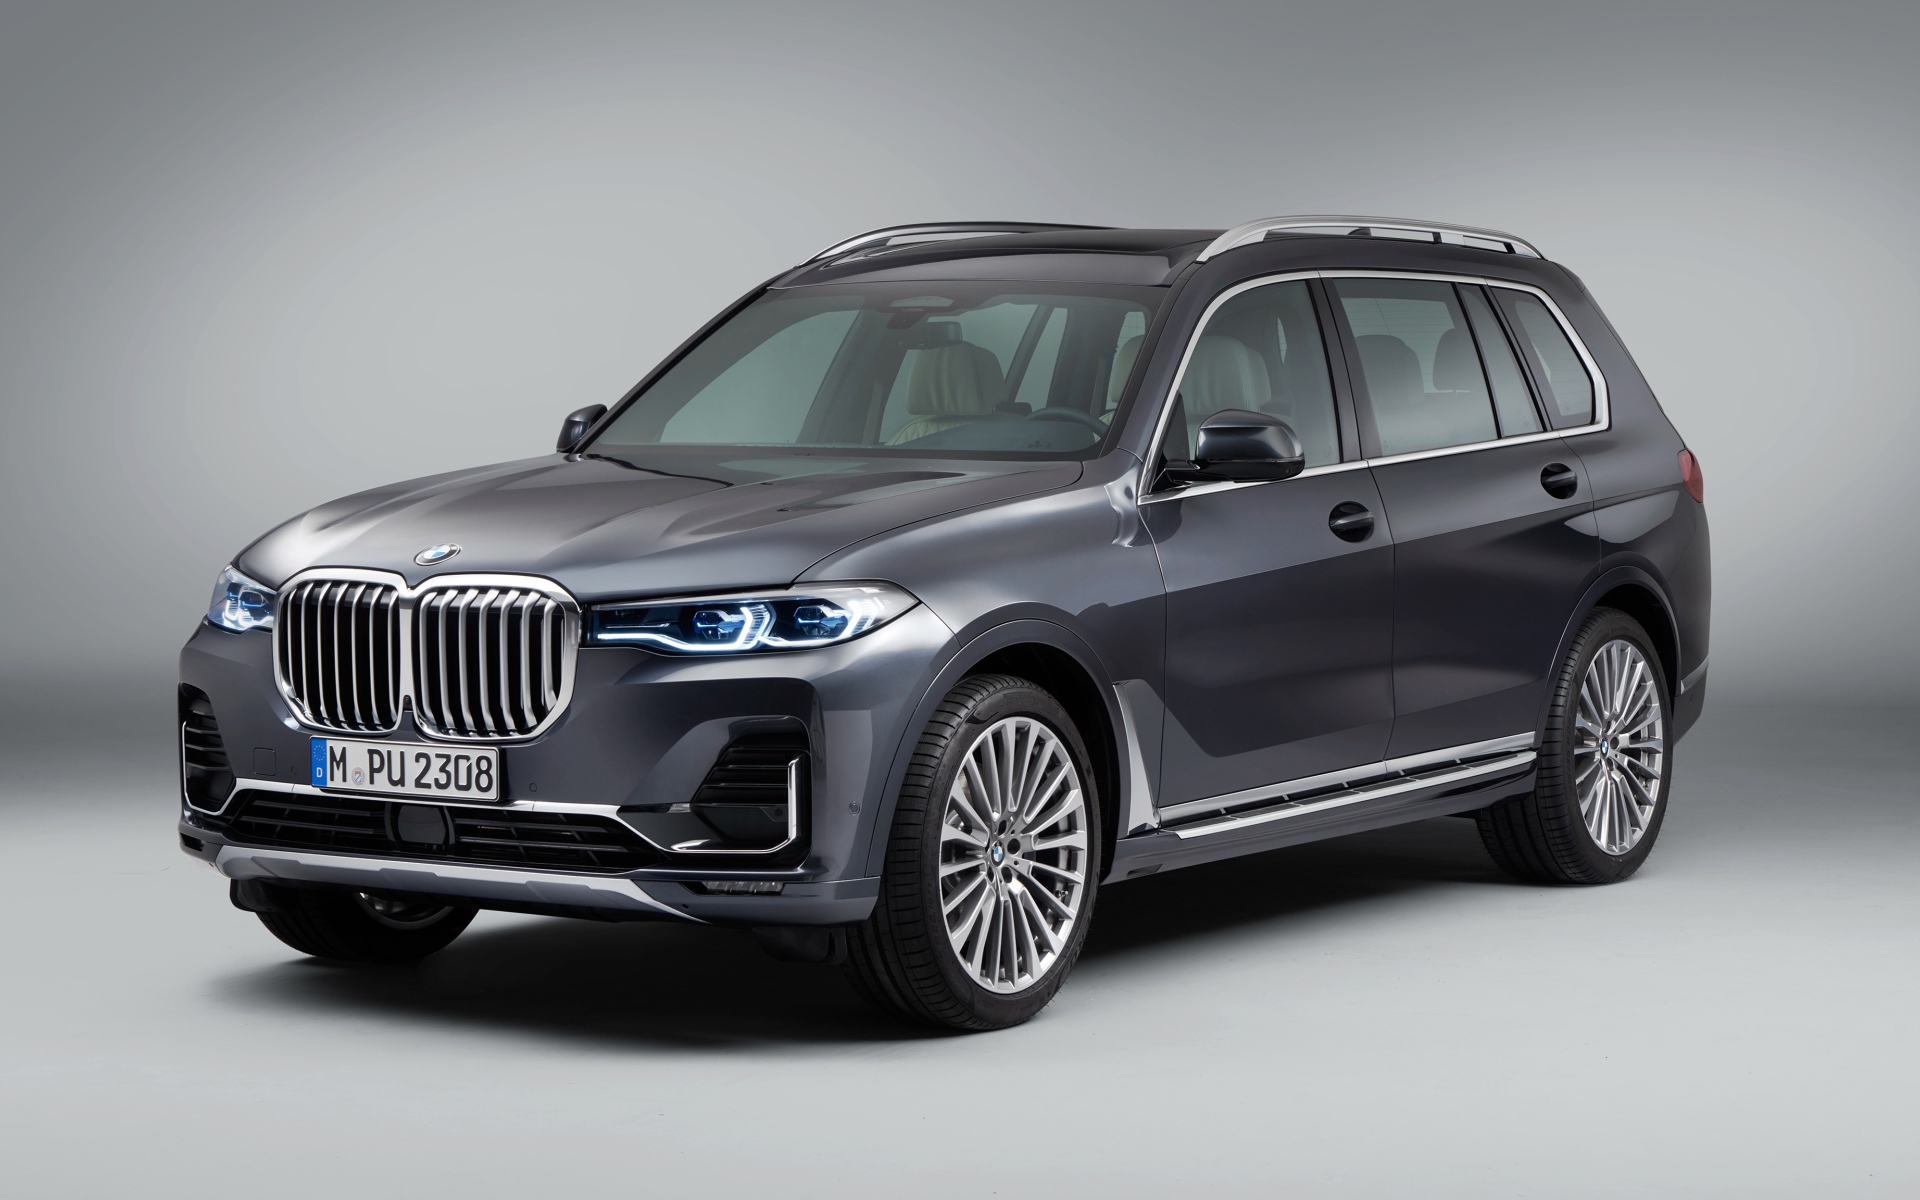 Silver BMW X7 2018 SUV on a gray background